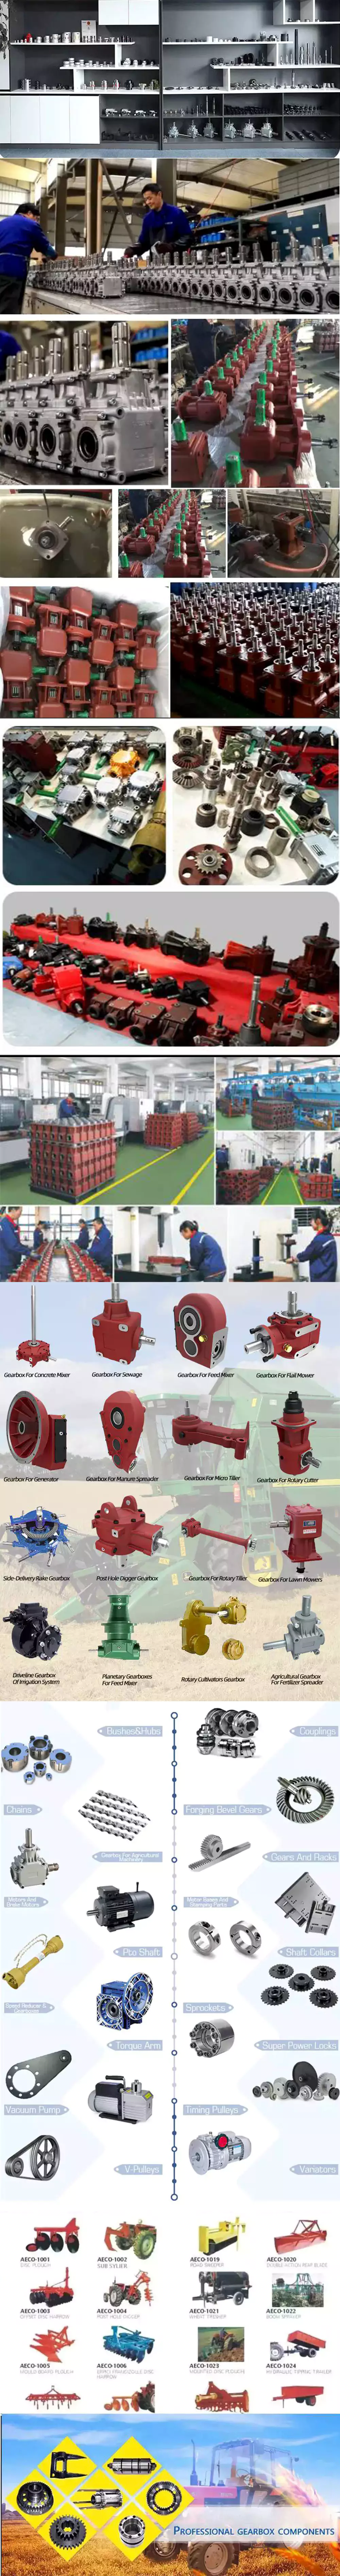 China Professional CHINAMFG Mrt Series Quality Precision Flial Mowers 90 Degrees Steering Gear Box Lawn Mower Gearbox Suppiler   agricultural gearboxes	